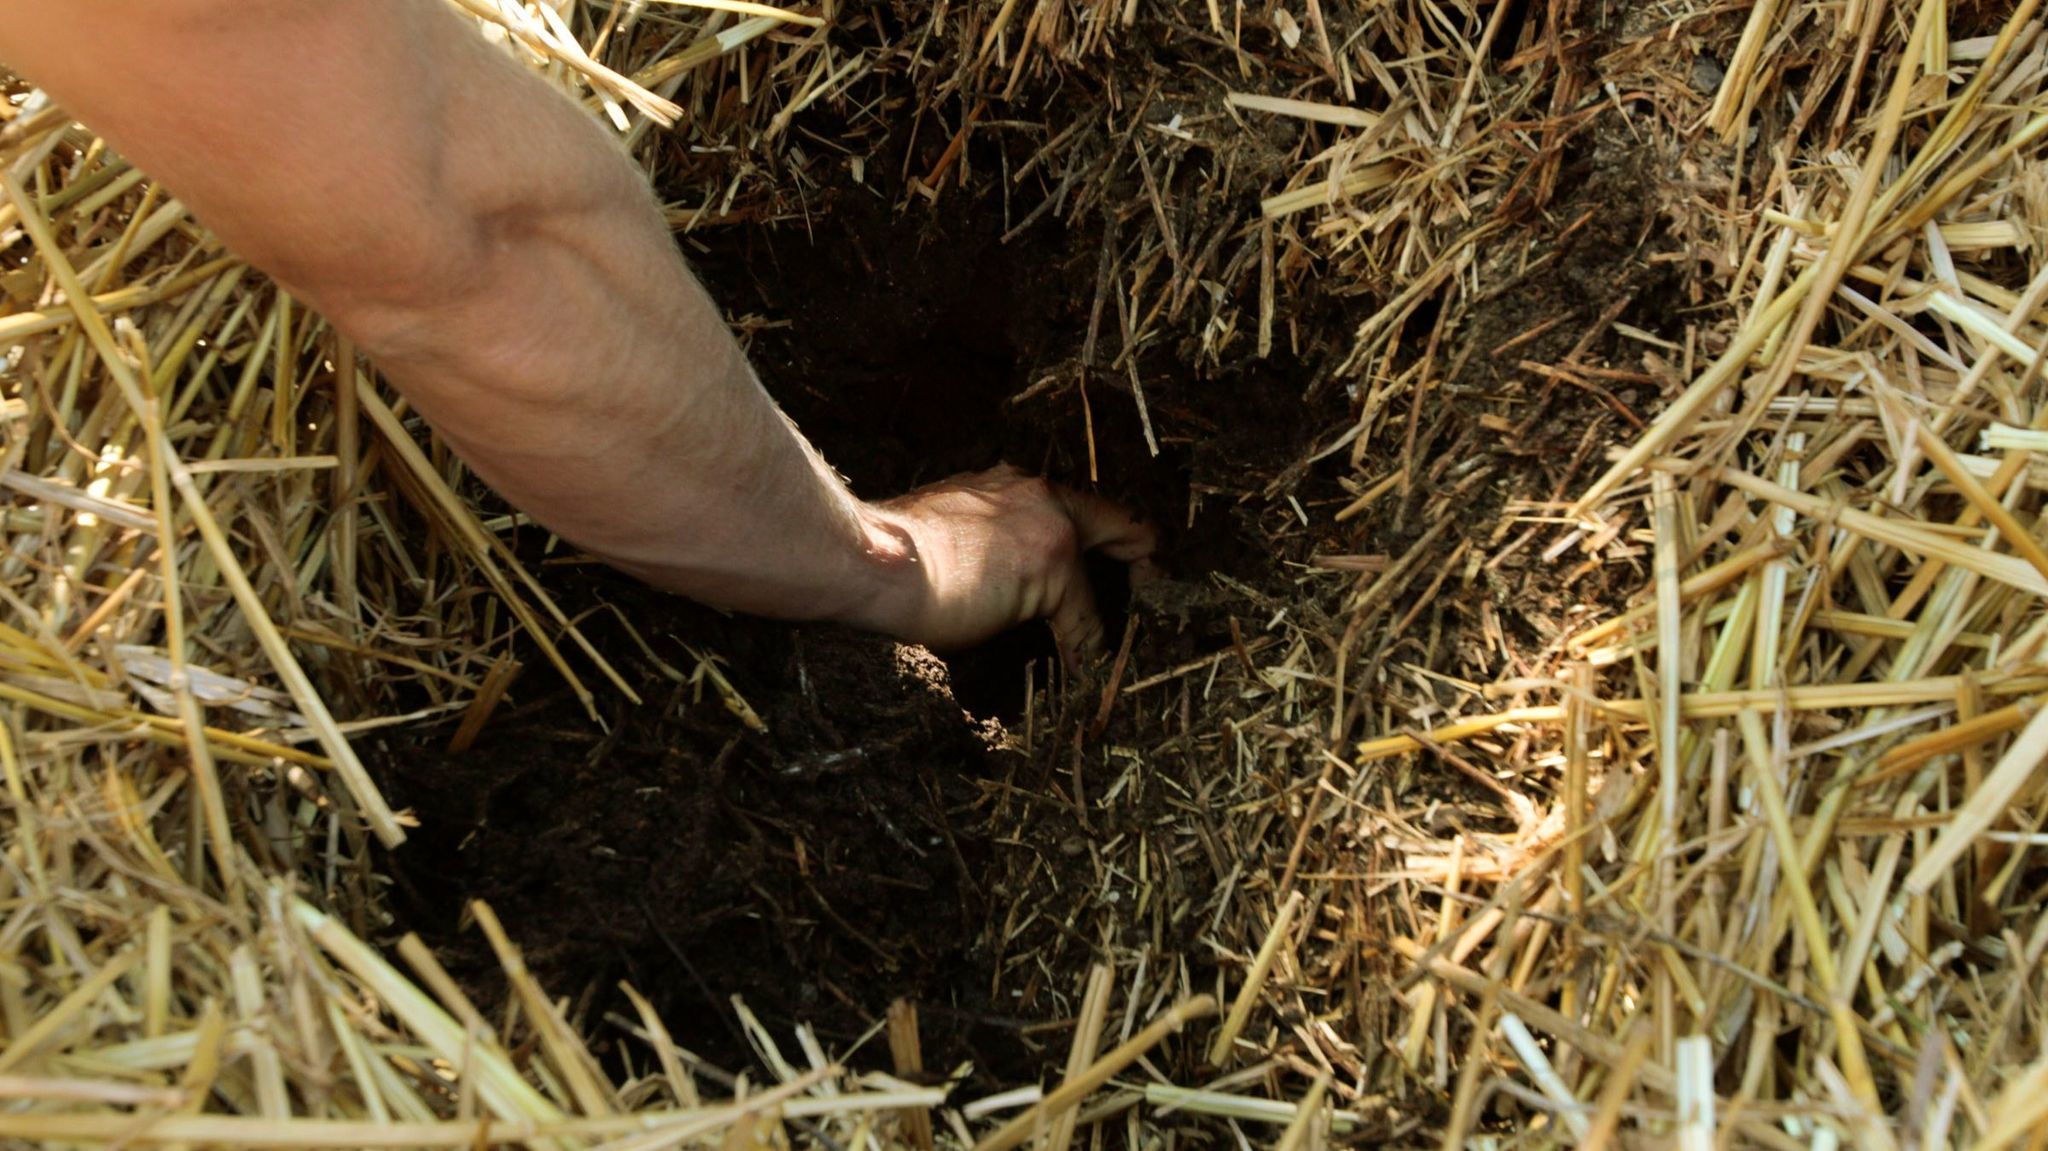 The book details how to make supersoil, or biodynamic compost.